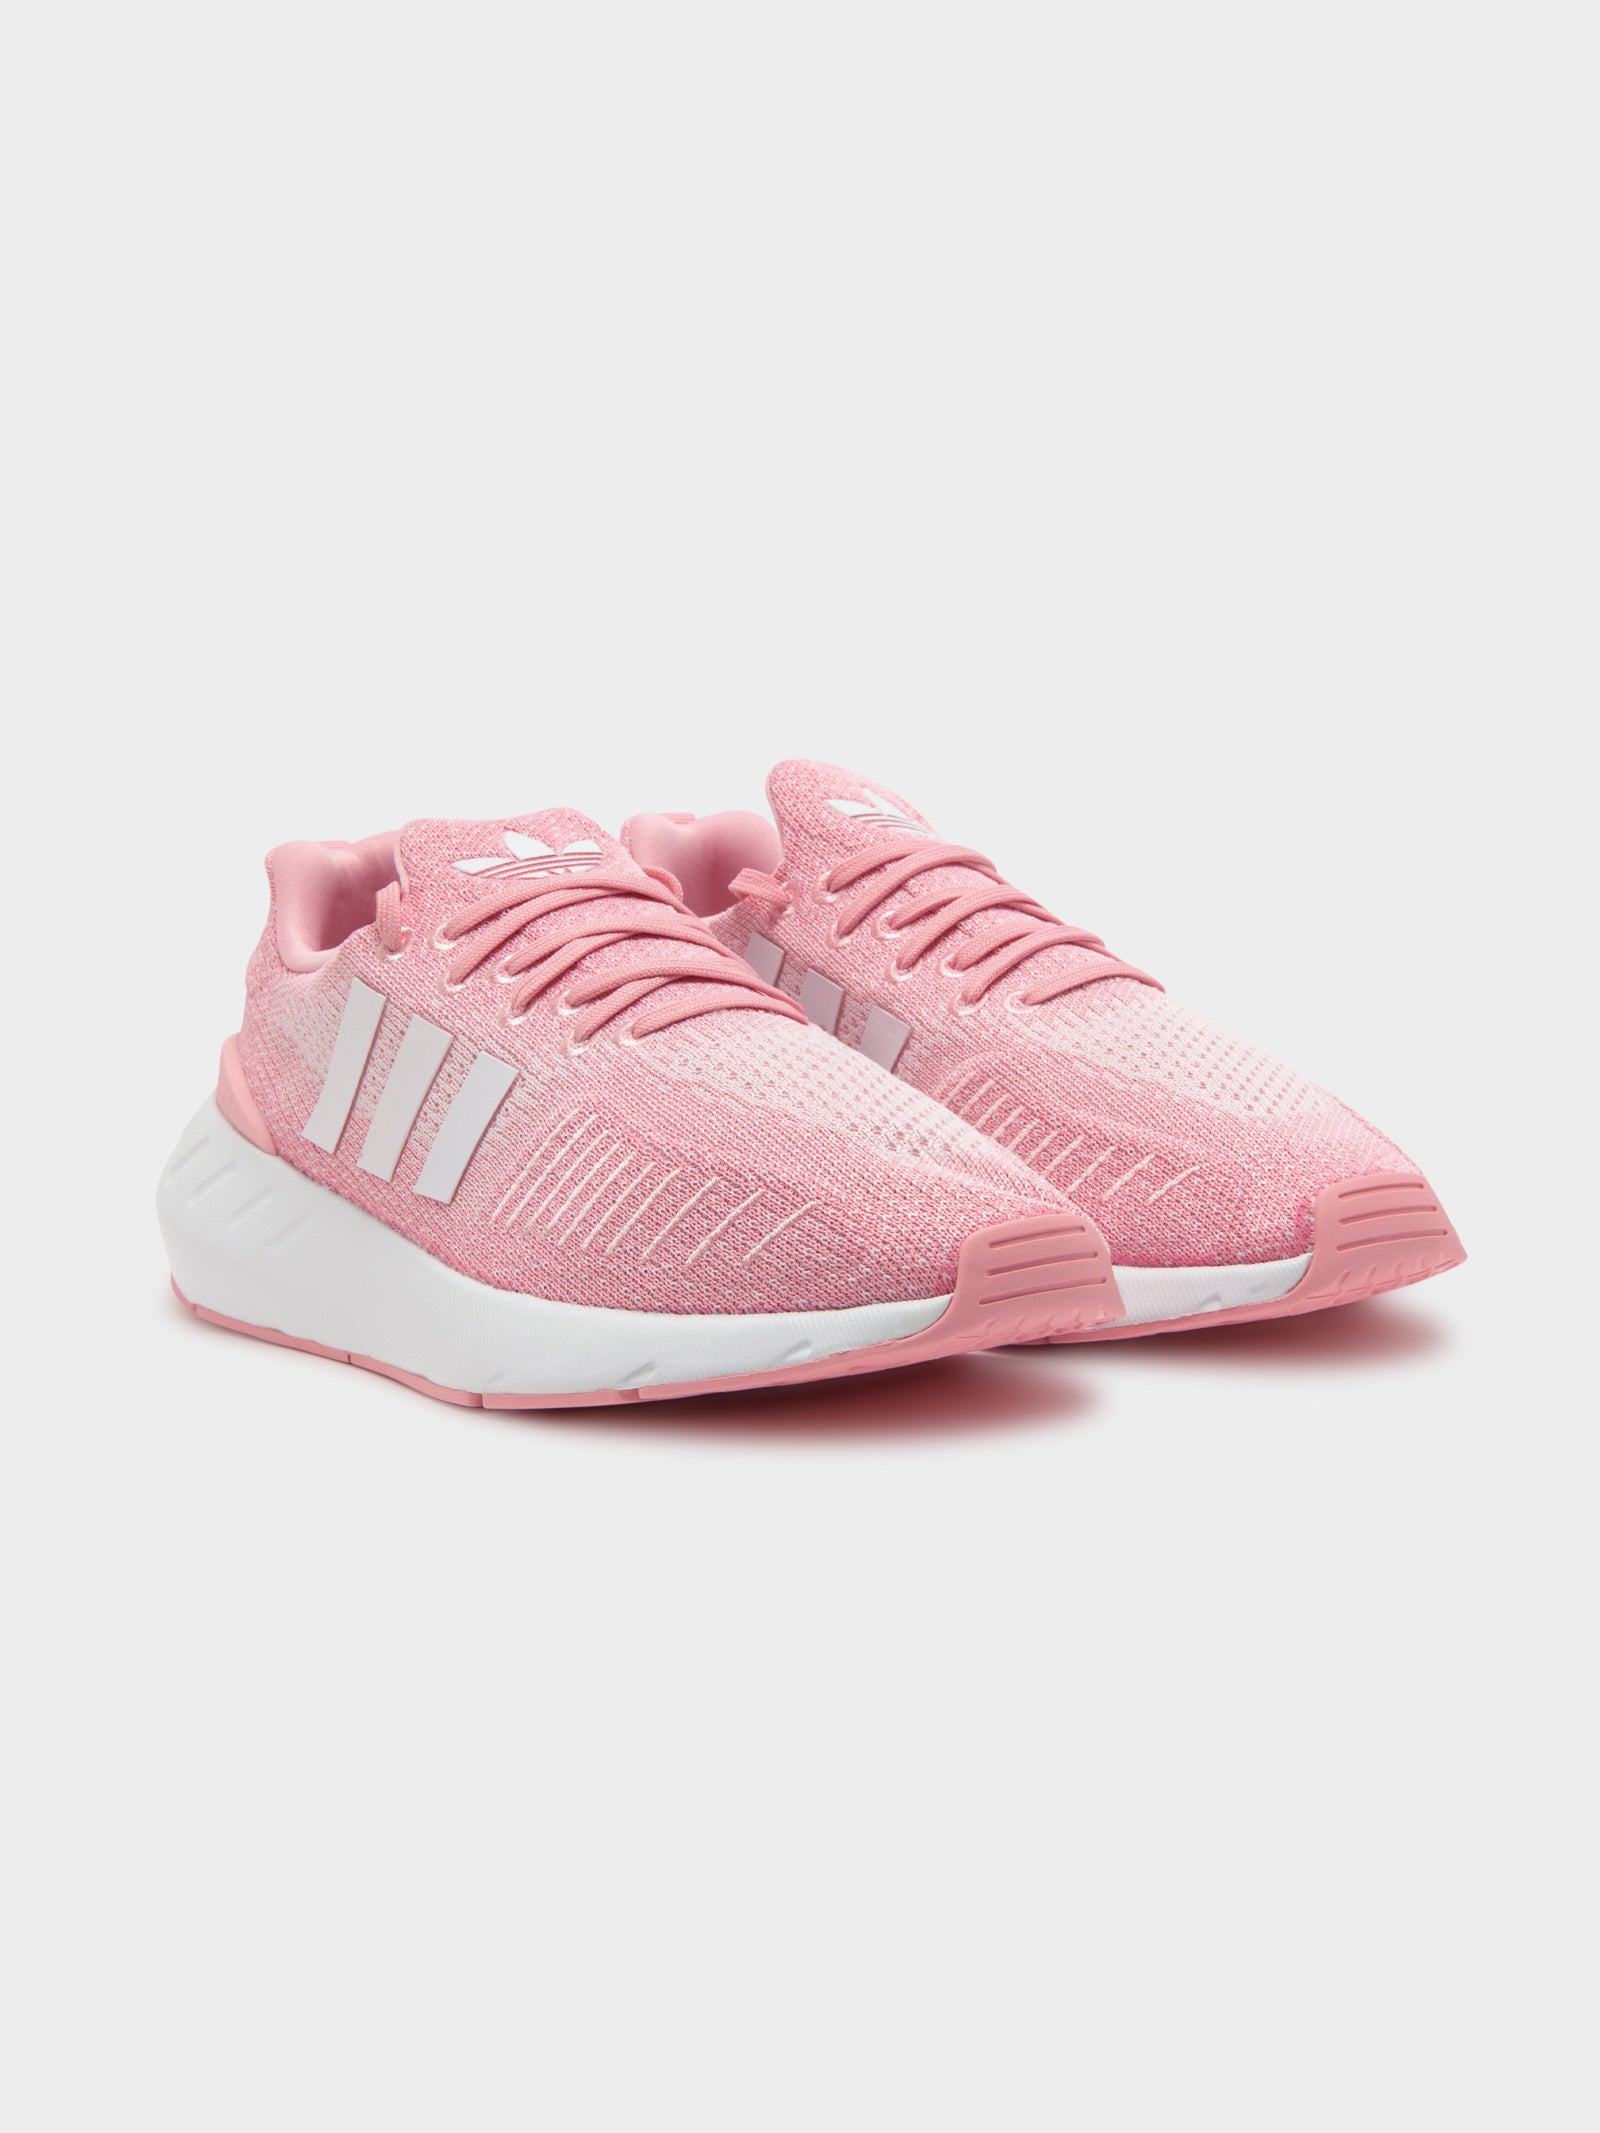 adidas Originals Gazelle Bold sneakers with white sole in light pink | ASOS